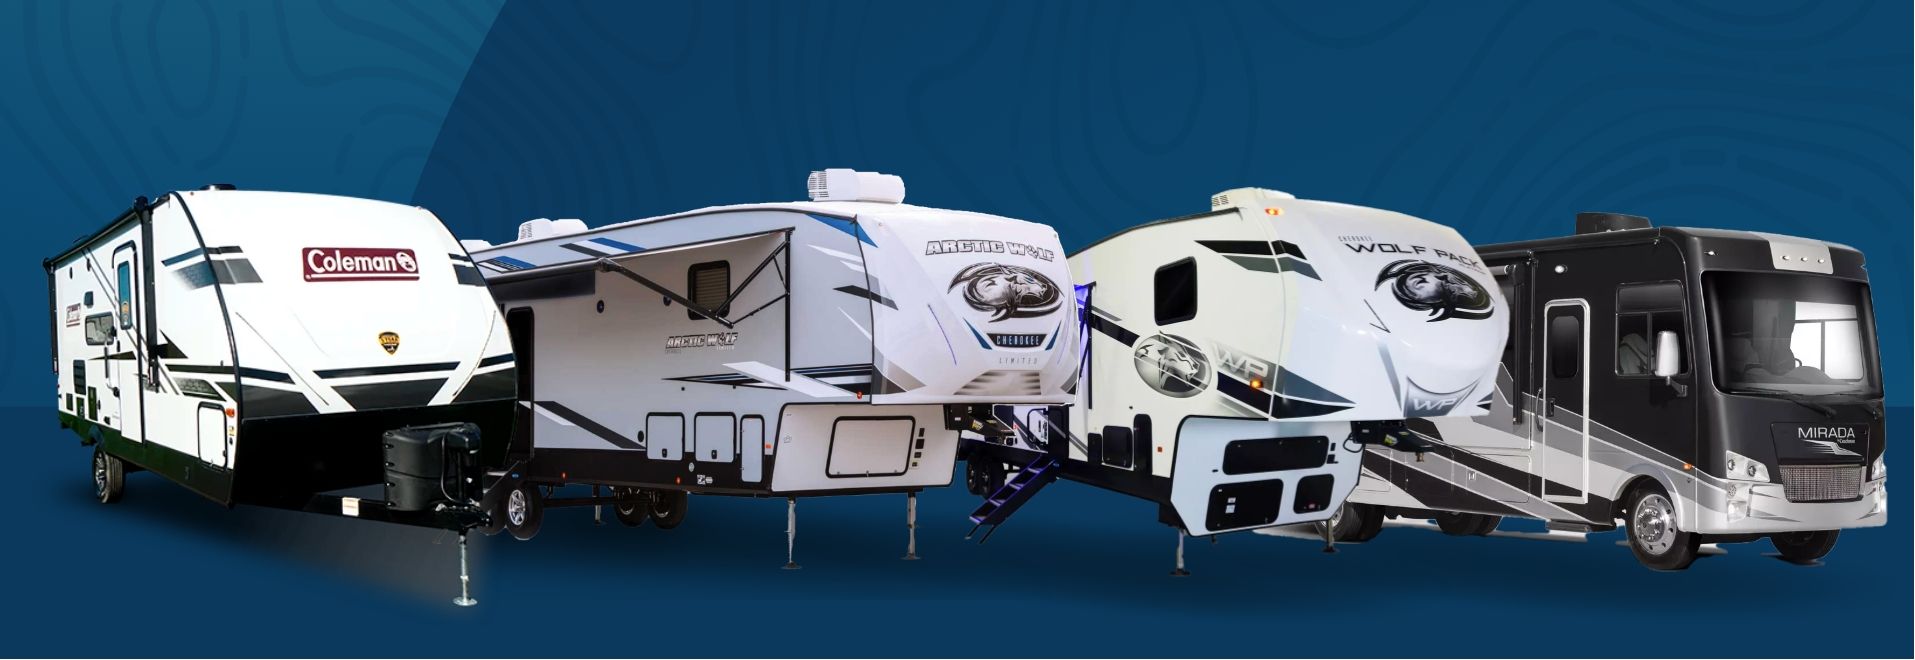 Towing and Parking: What RV to Choose For Your Camping Lifestyle